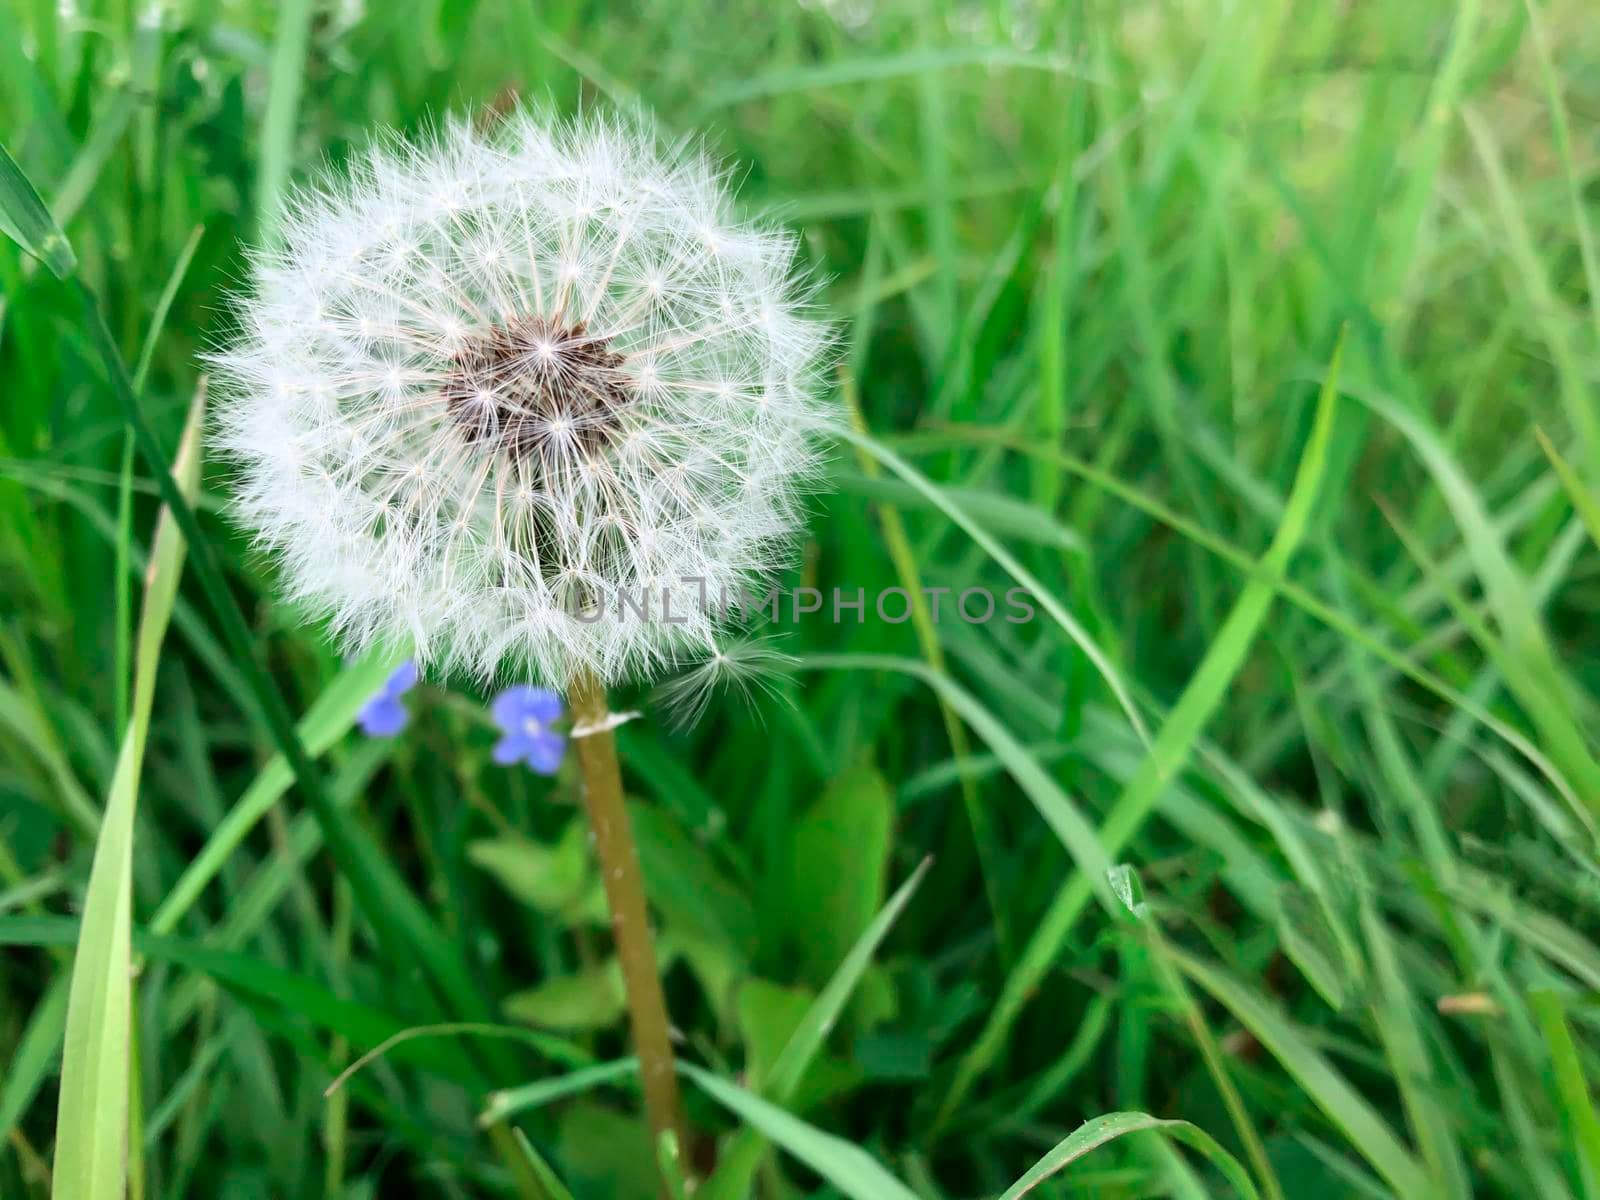 Lonely white dandelion close-up in a field on a green background by Sonluna